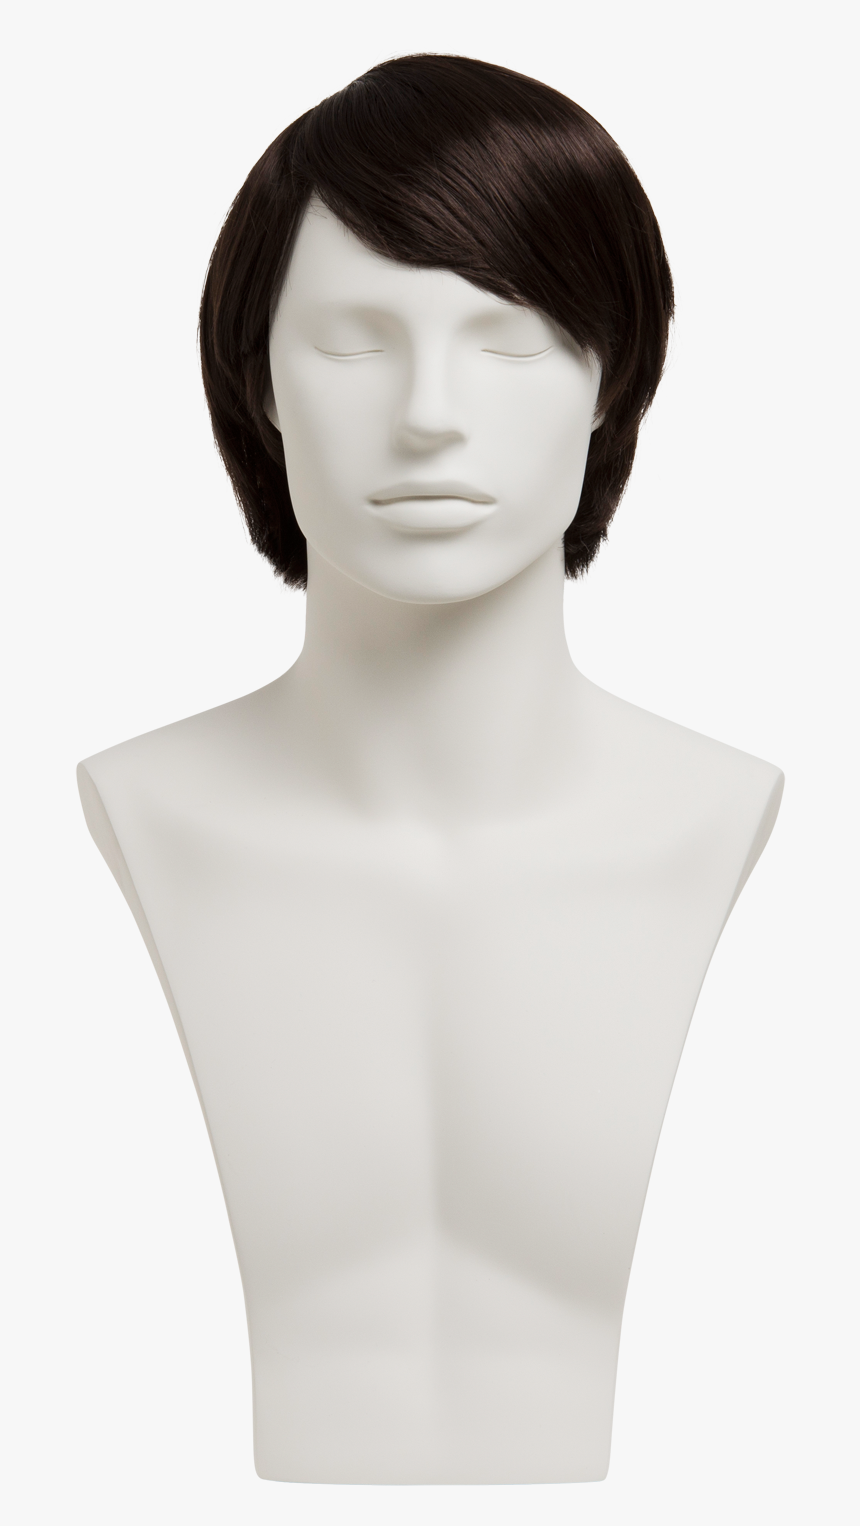 Male Wig Png, Transparent Png, Free Download